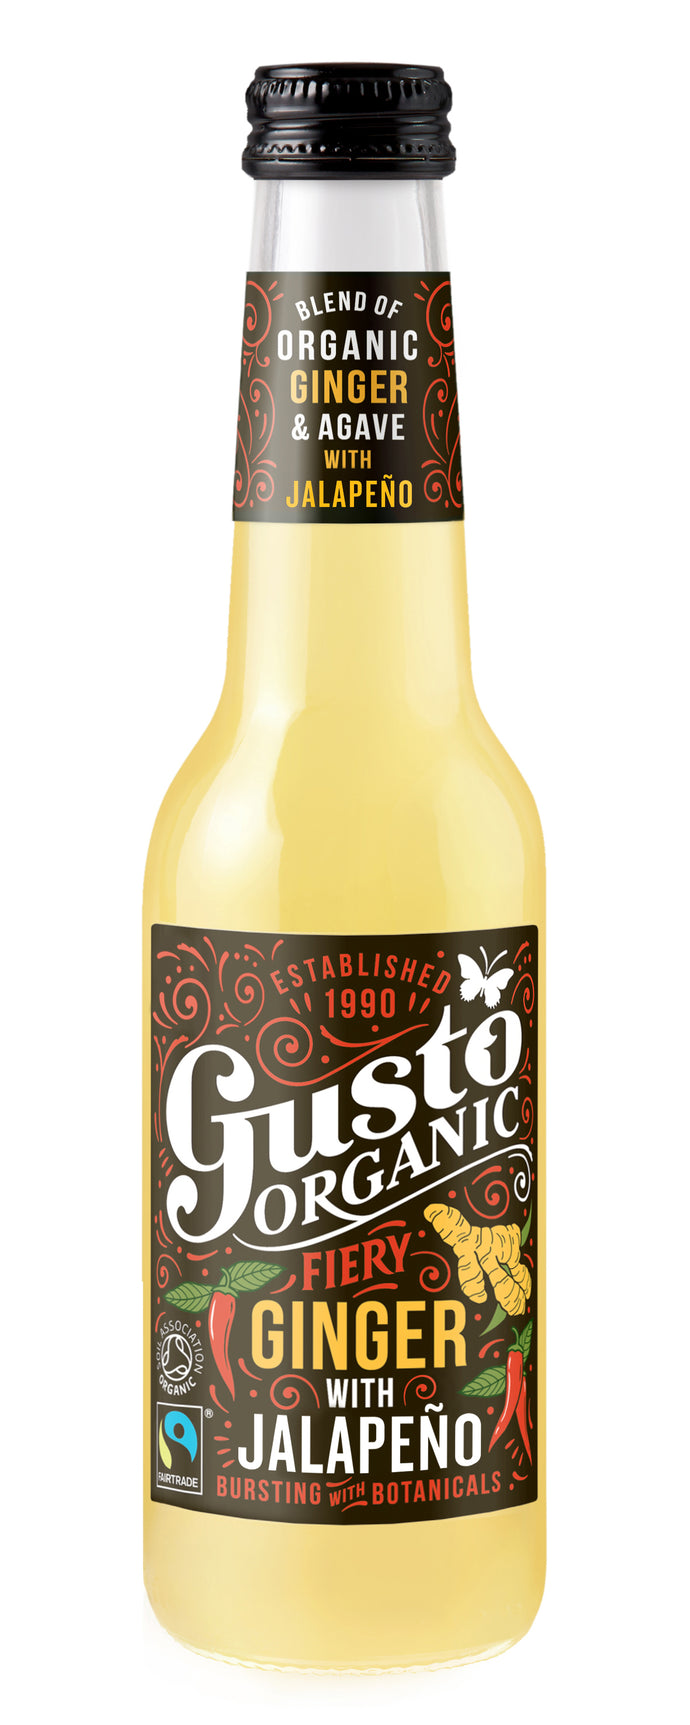 Gusto Organic Fiery Ginger with Jalapeño